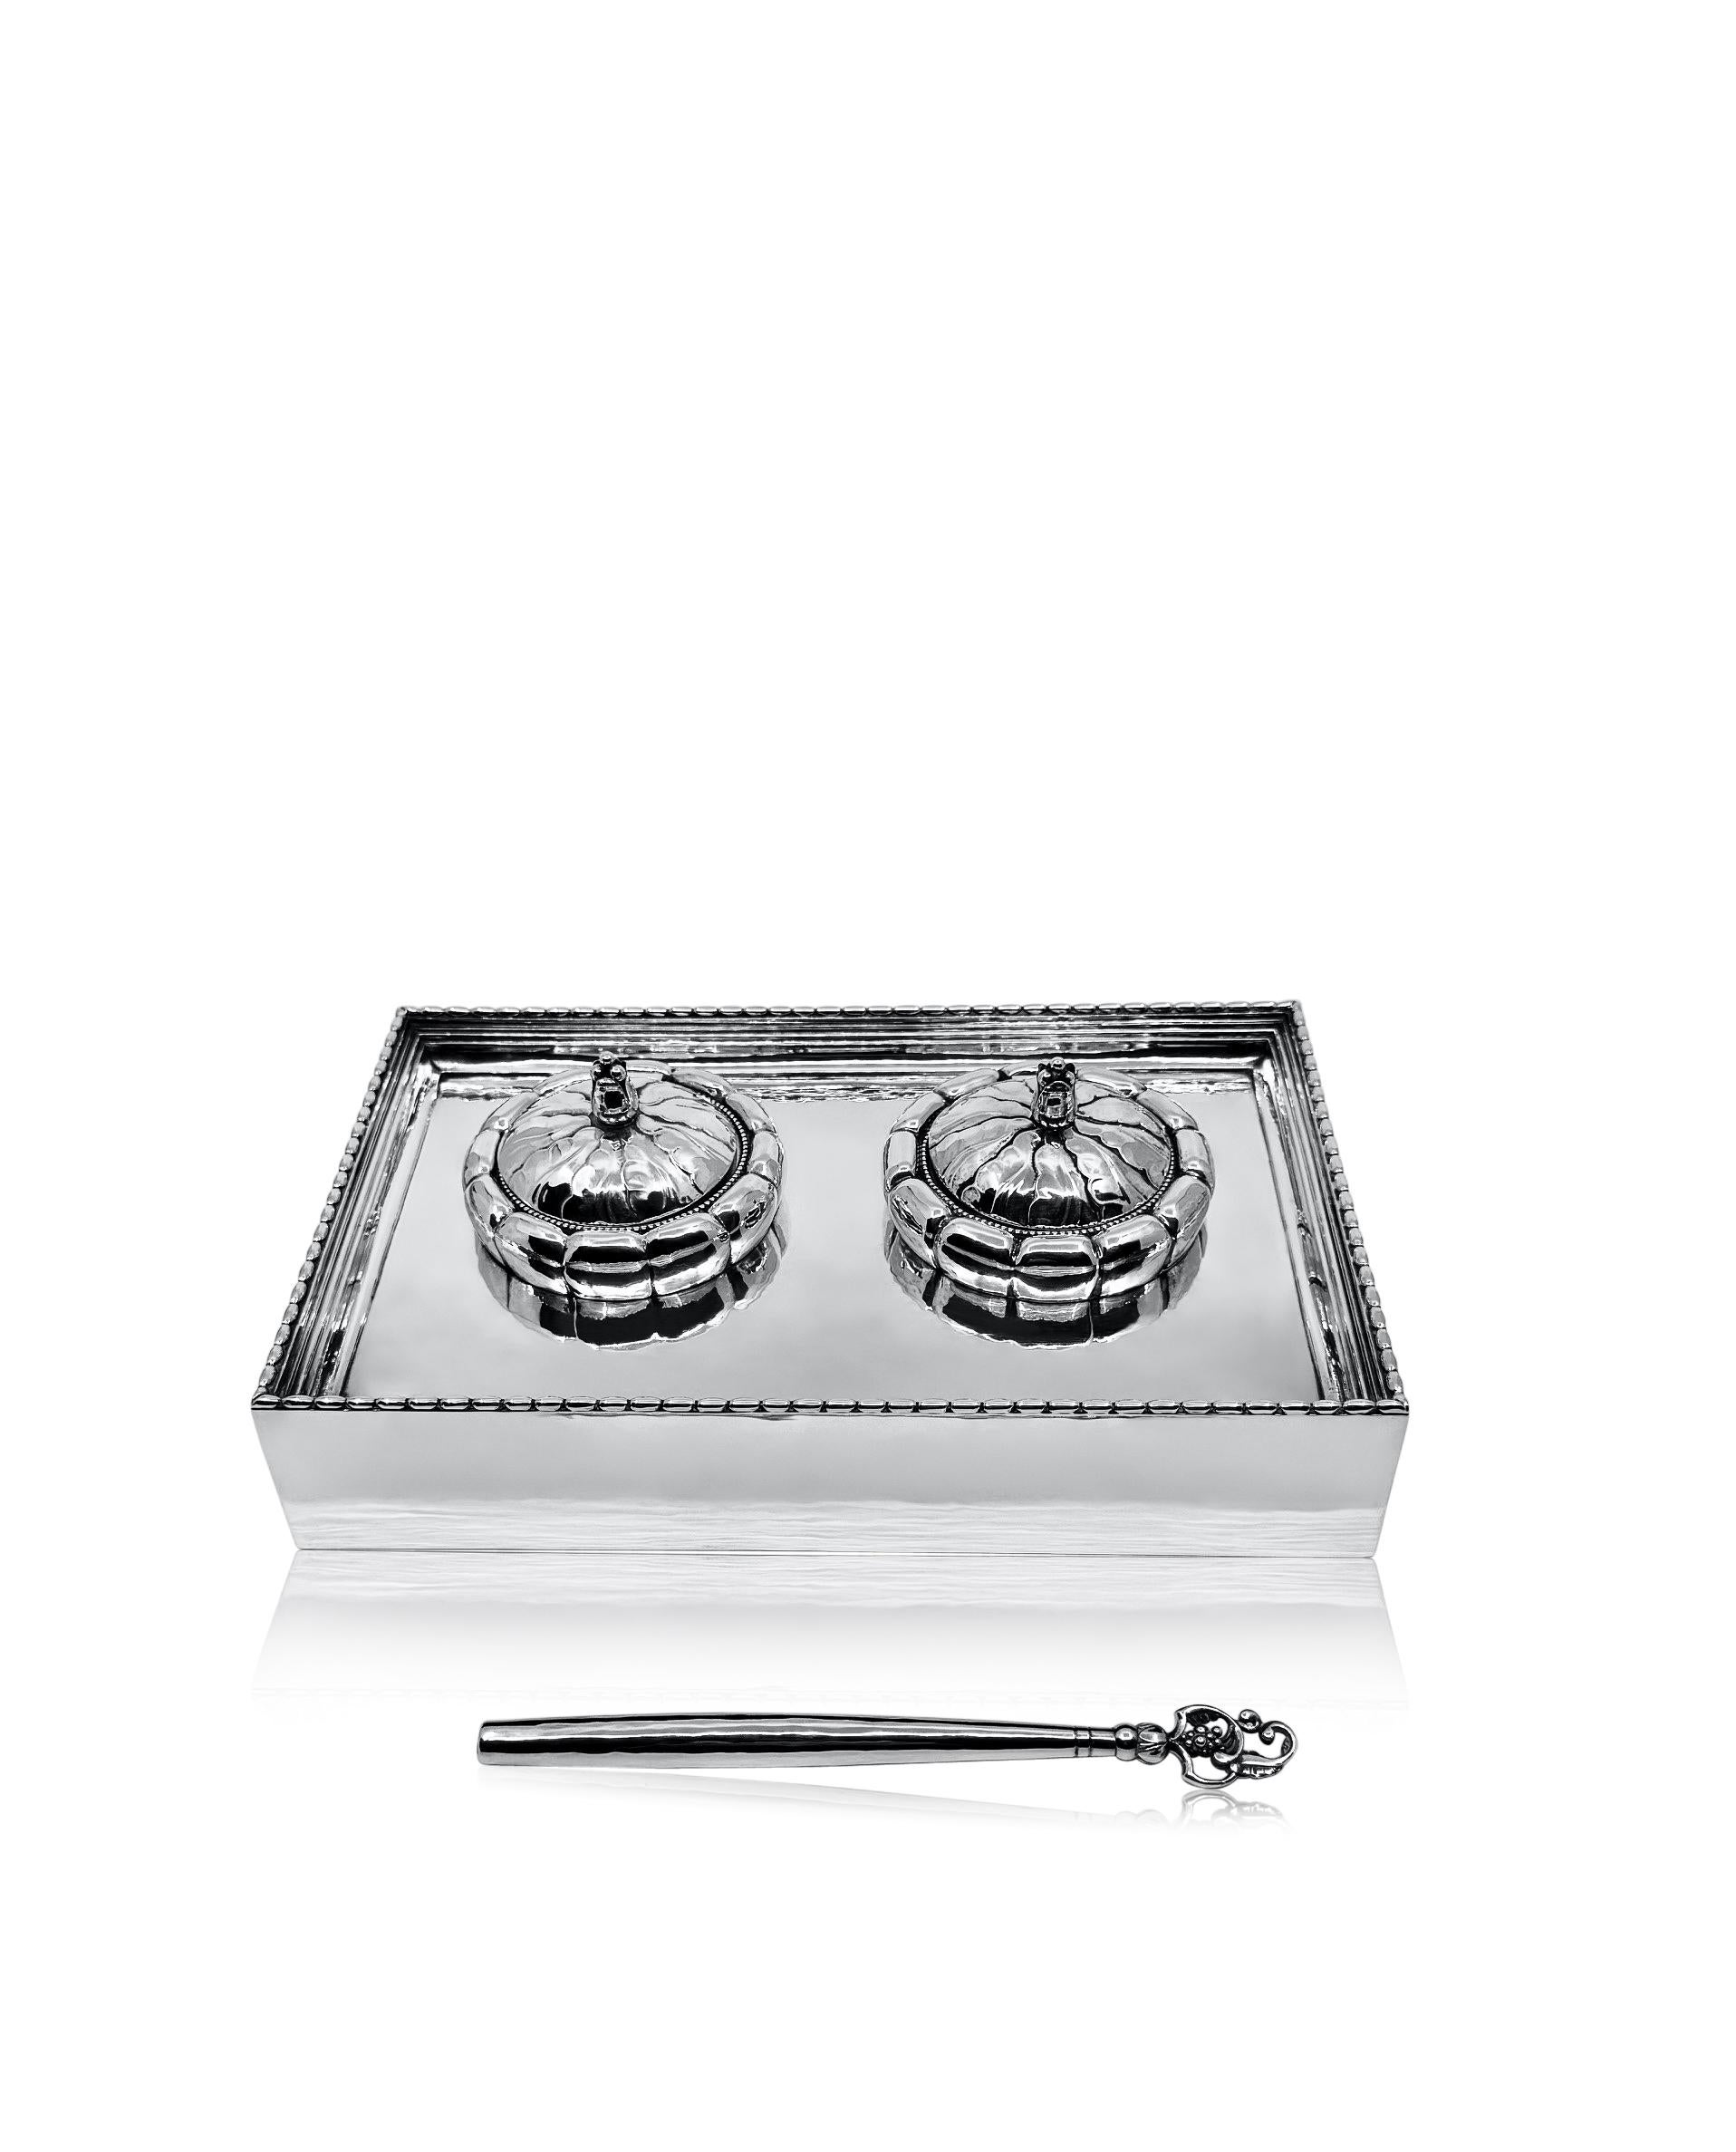 An antique Georg Jensen sterling silver inkwell and matching pen, design #254 by Georg Jensen in 1918. The rectangular base is meticulously hand-hammered, showcasing a finely crafted beaded edge. The inkwell displays intricate hand chasing, with two